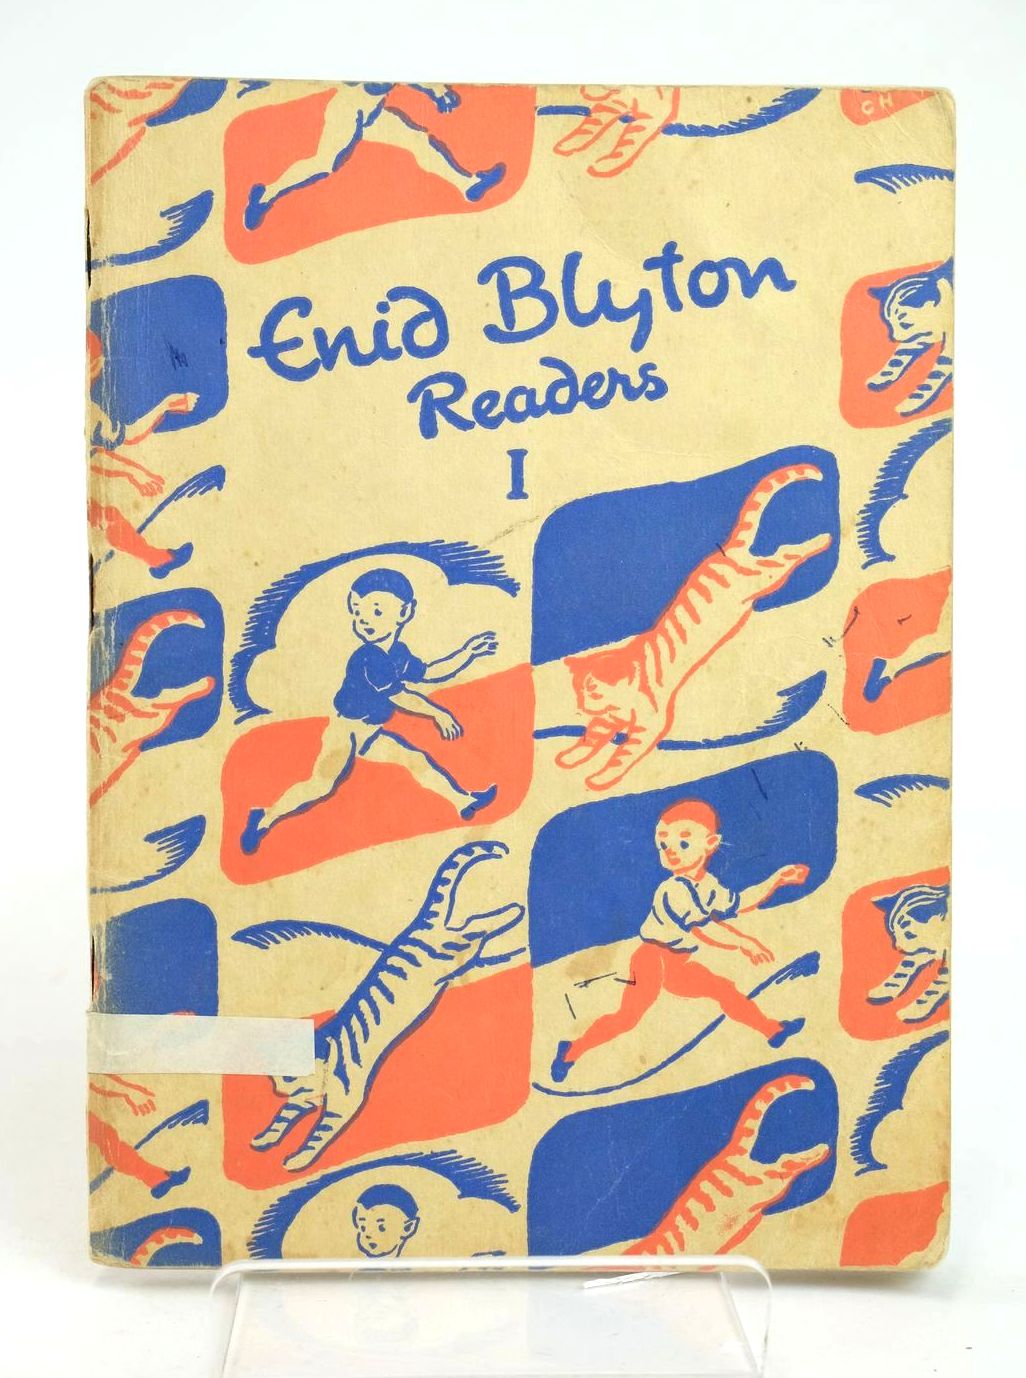 Photo of ENID BLYTON READERS 1 written by Blyton, Enid illustrated by Soper, Eileen published by Macmillan & Co. Ltd. (STOCK CODE: 1318985)  for sale by Stella & Rose's Books